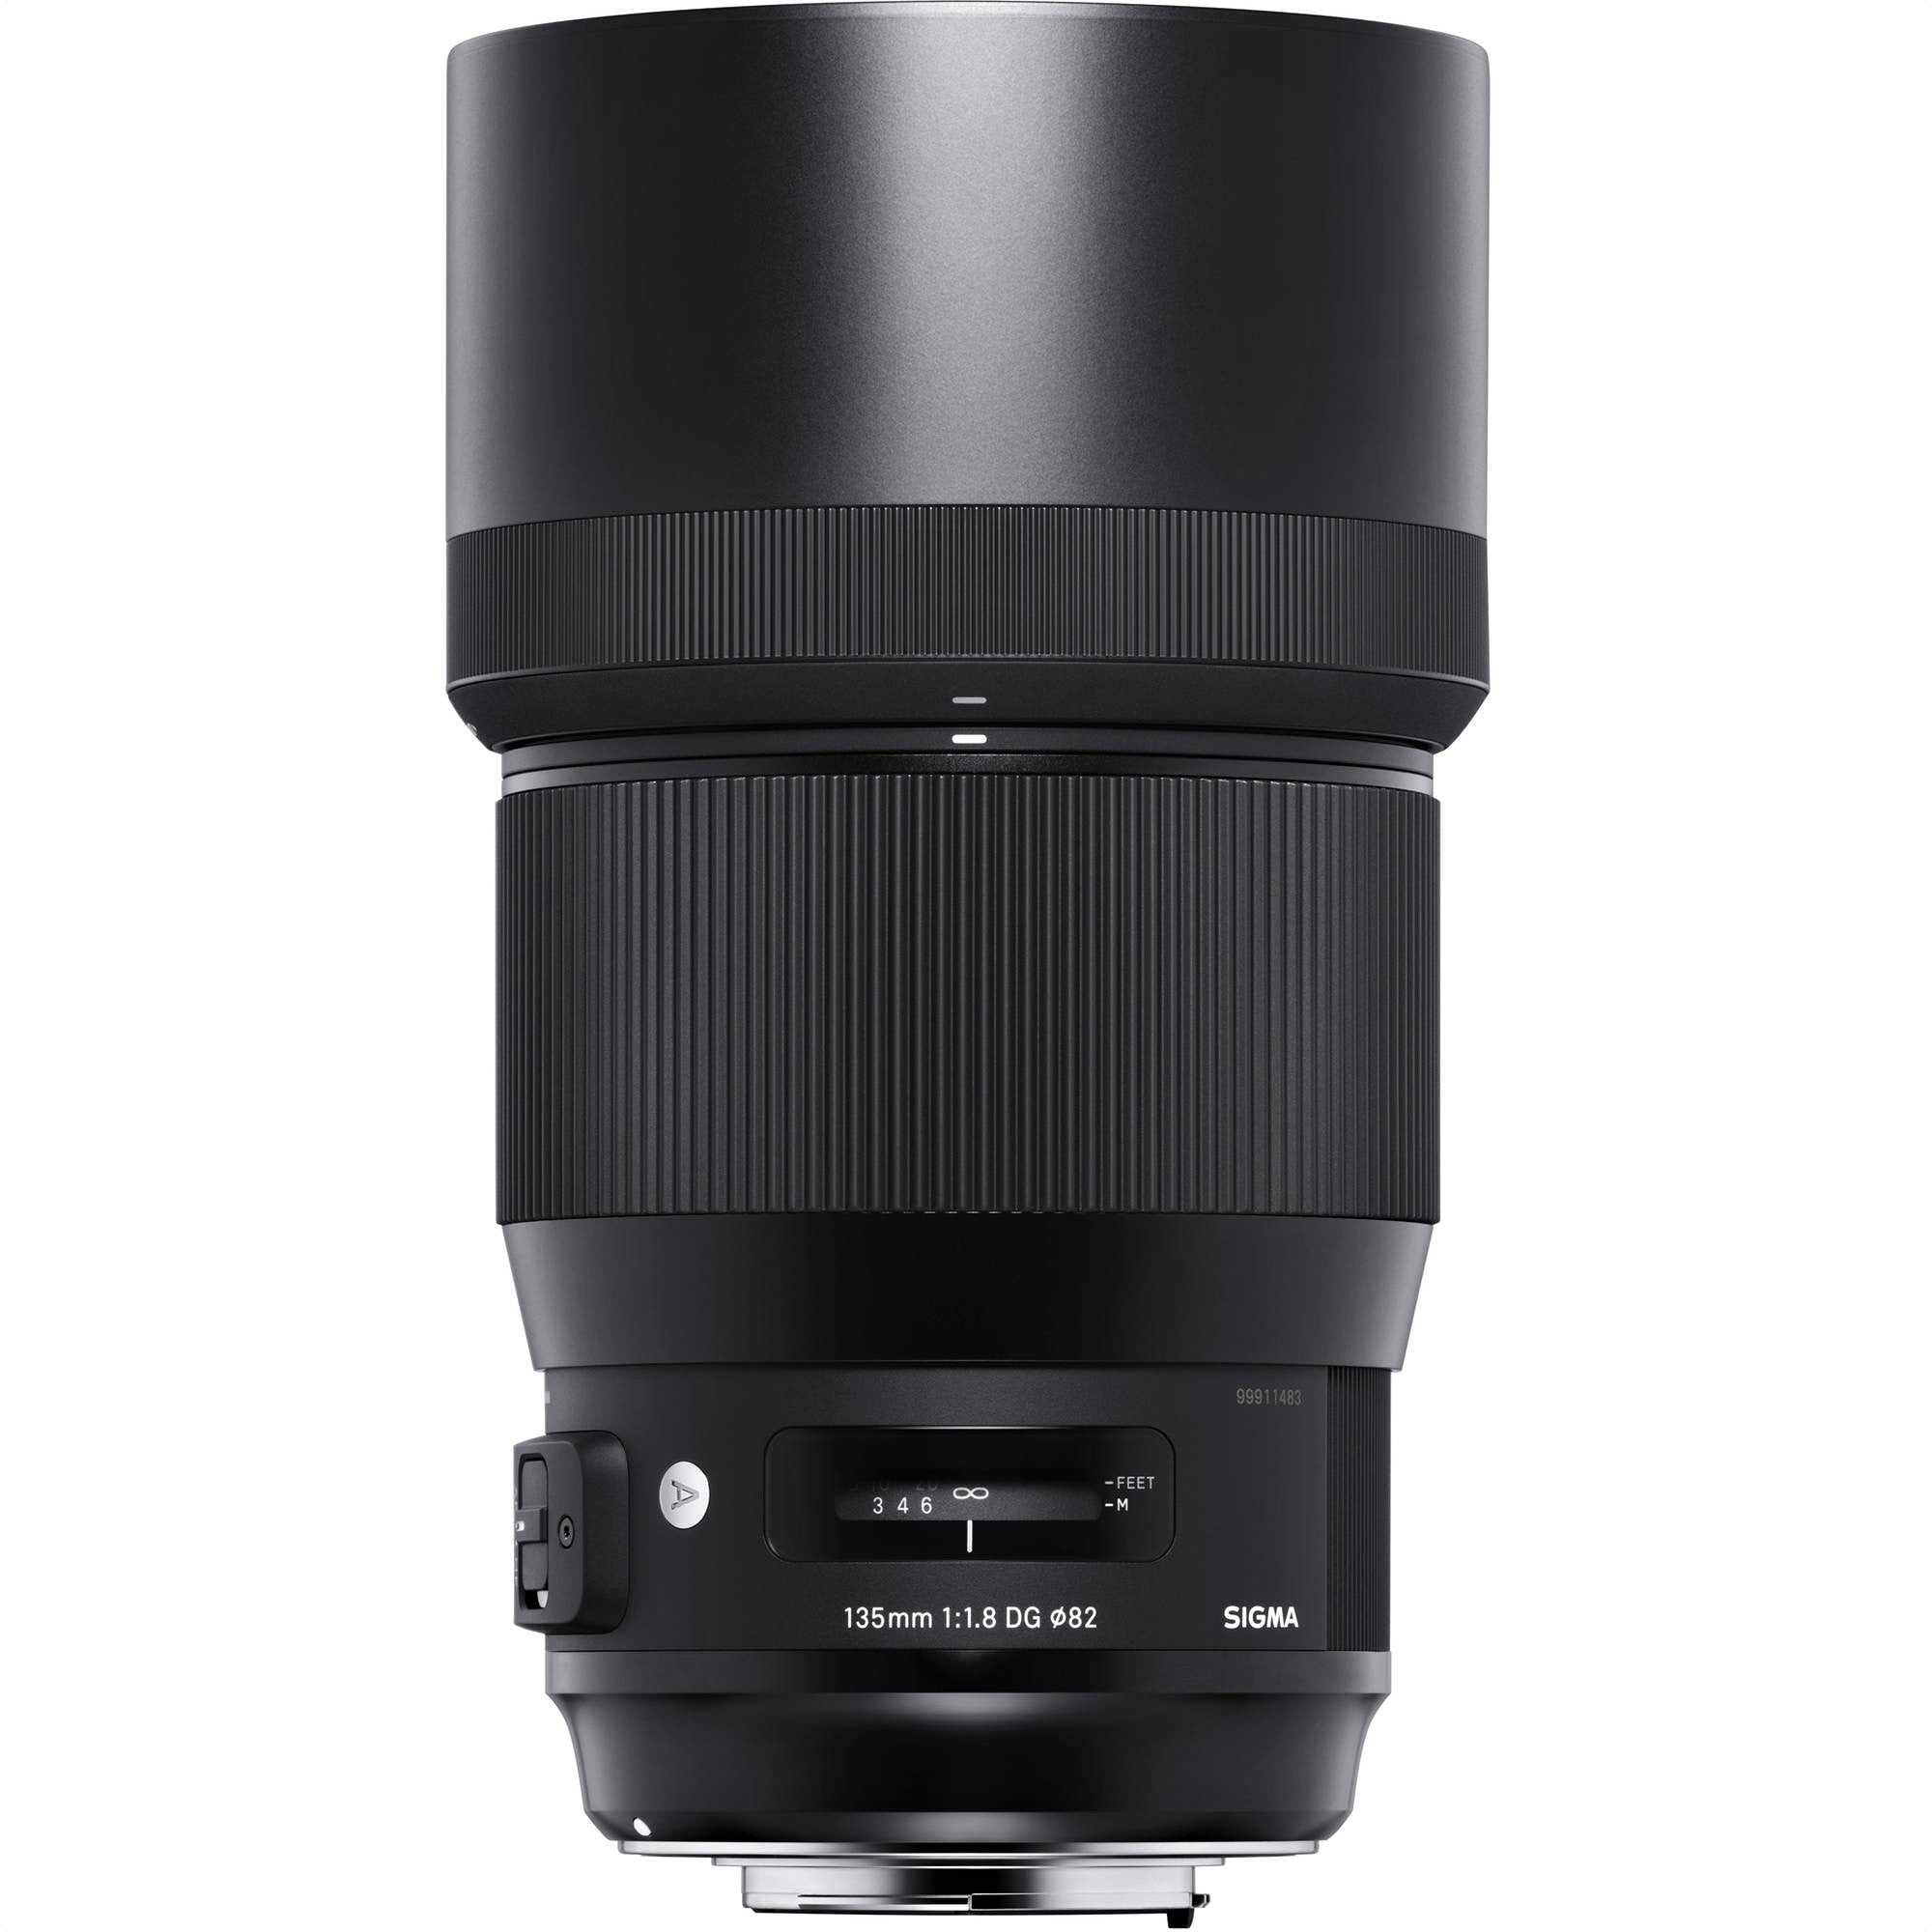 Sigma 135mm F1.8 DG HSM Art Lens for Nikon F with Attached Lens Hood on the Top